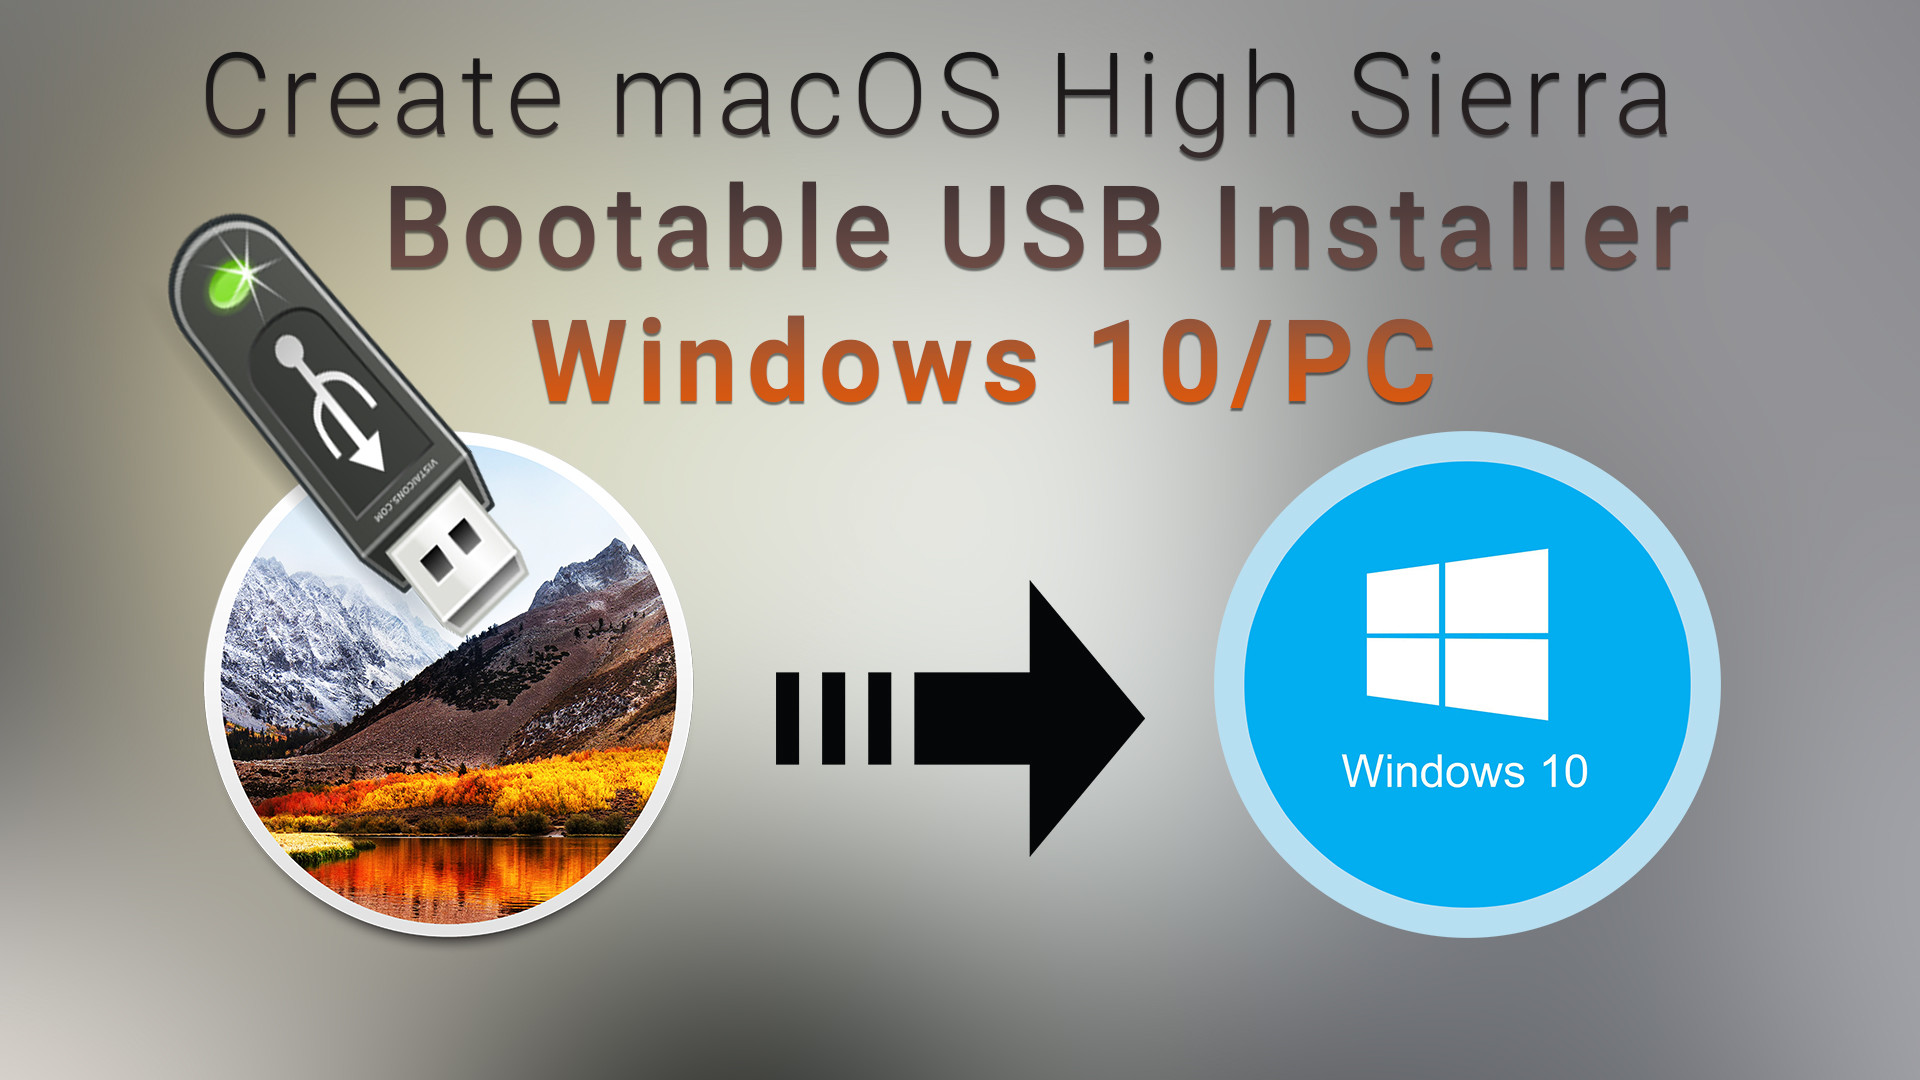 can you create a bootable usb windows 10 for a pc from a mac